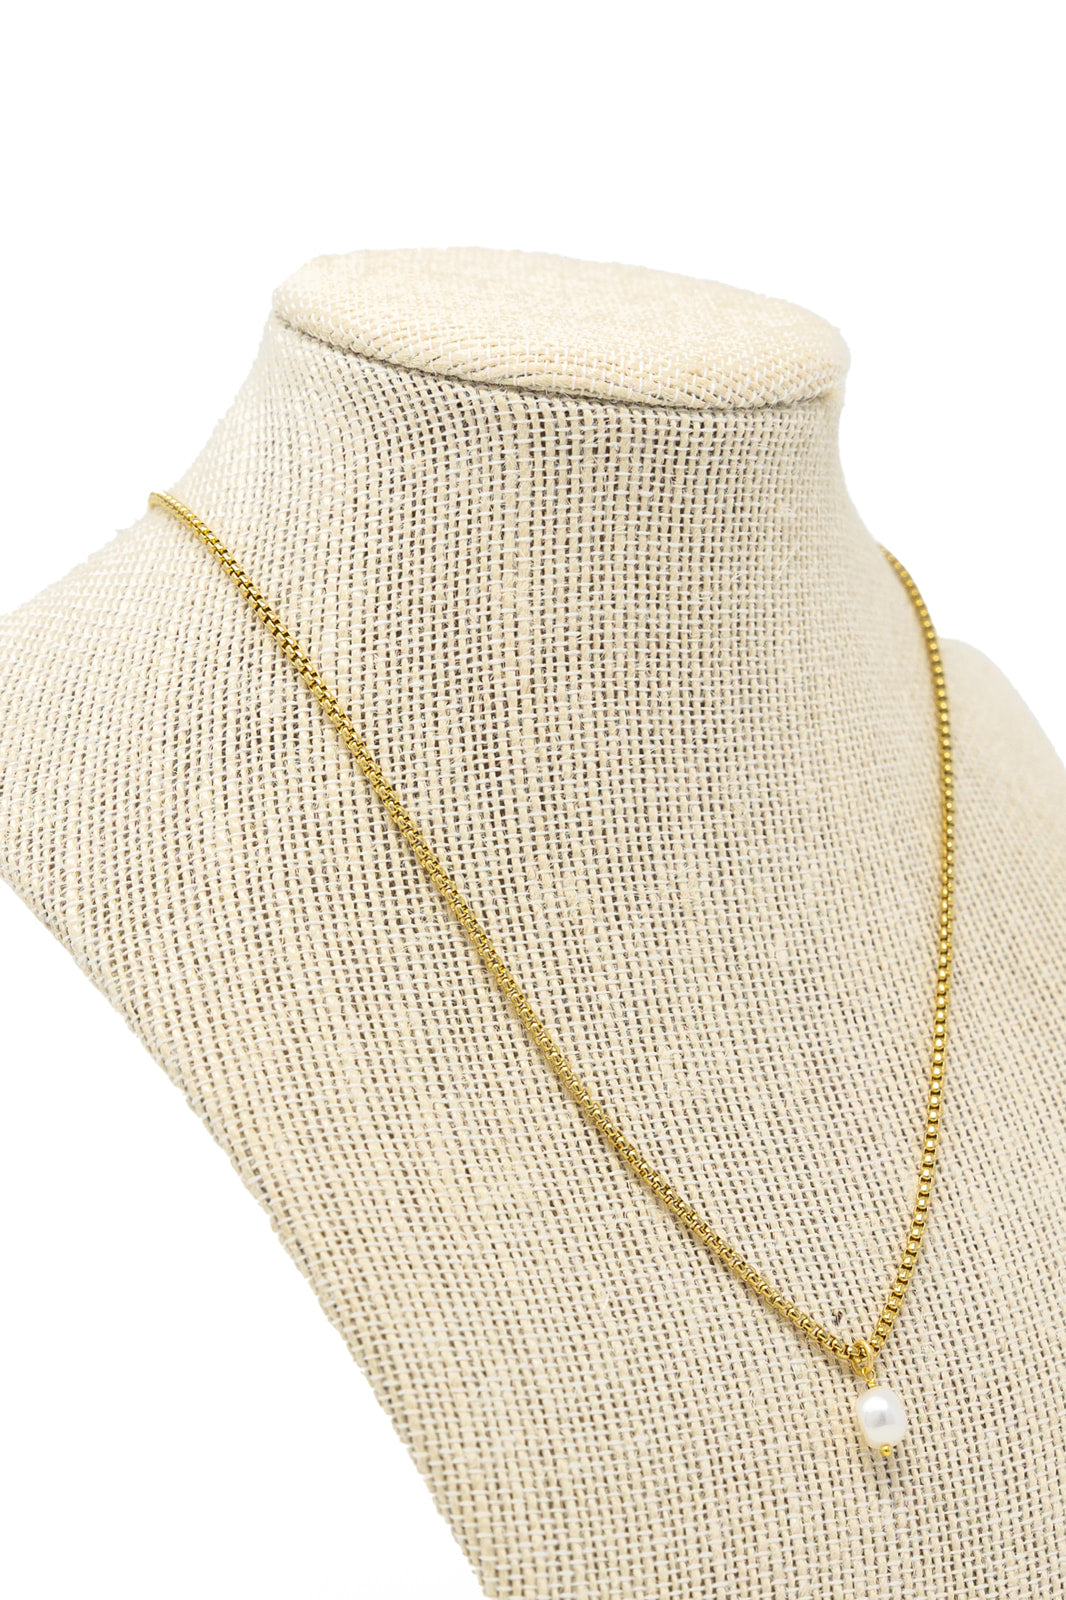 Single Pearl Chain Necklace